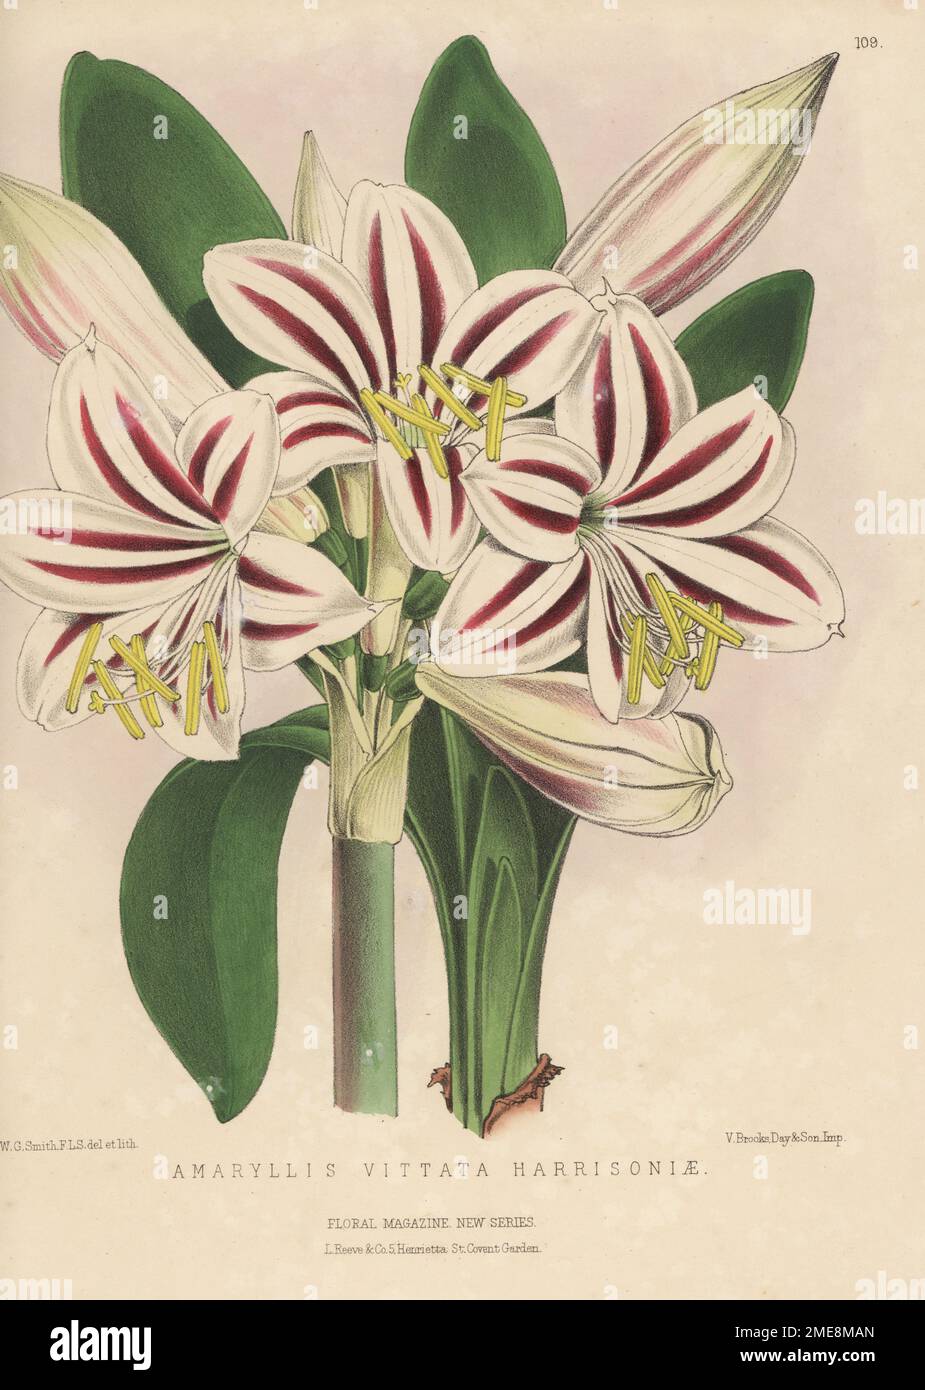 Harrison's amaryllis, Hippeastrum vittatum. Found in Lima, Peru, by William Harrison and imported by nurseryman William Bull, King's Road, Chelsea. As Amaryllis vittata var. harrisoniae. Handcolored botanical illustration drawn and lithographed by Worthington George Smith from Henry Honywood Dombrain's Floral Magazine, New Series, Volume 3, L. Reeve, London, 1874. Lithograph printed by Vincent Brooks, Day & Son. Stock Photo